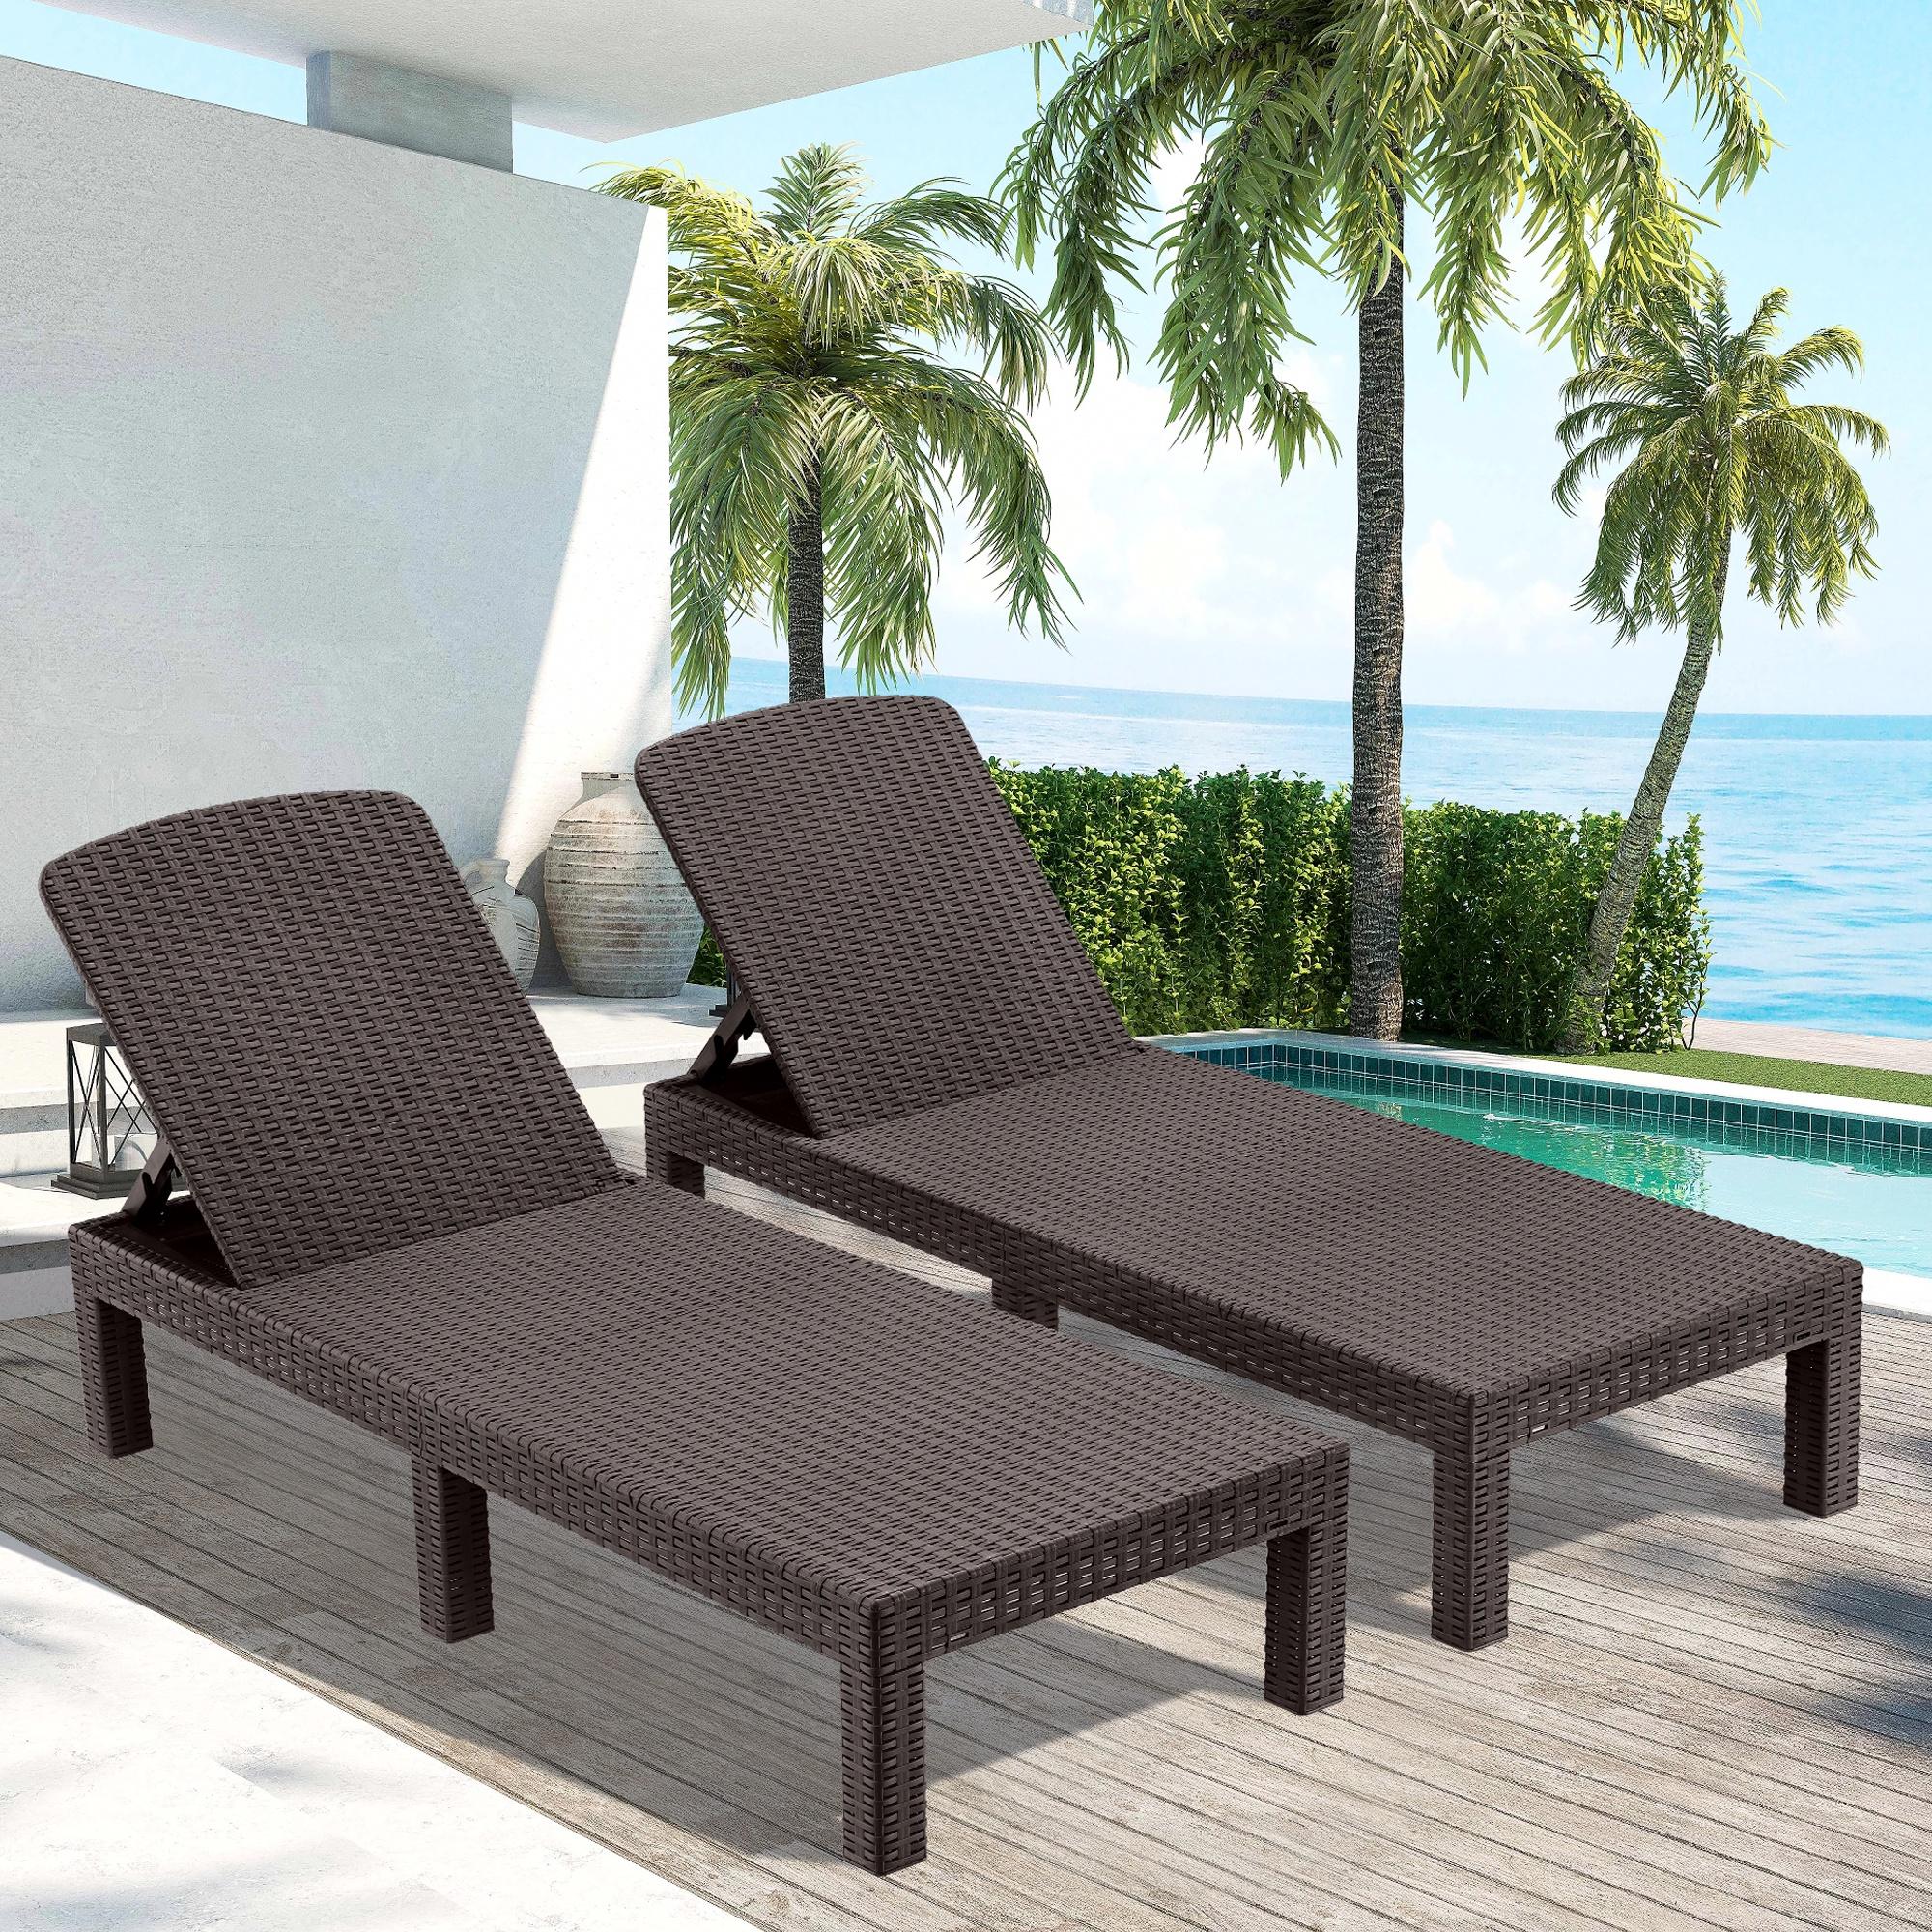 SYNGAR Patio Chaise Lounge Chairs Set of 2, Adjustable Chaise for Outside, PP Resin Reclining Lounge Chairs, Outdoor Sun Loungers for Poolside Deck Garden, Espresso - image 1 of 10